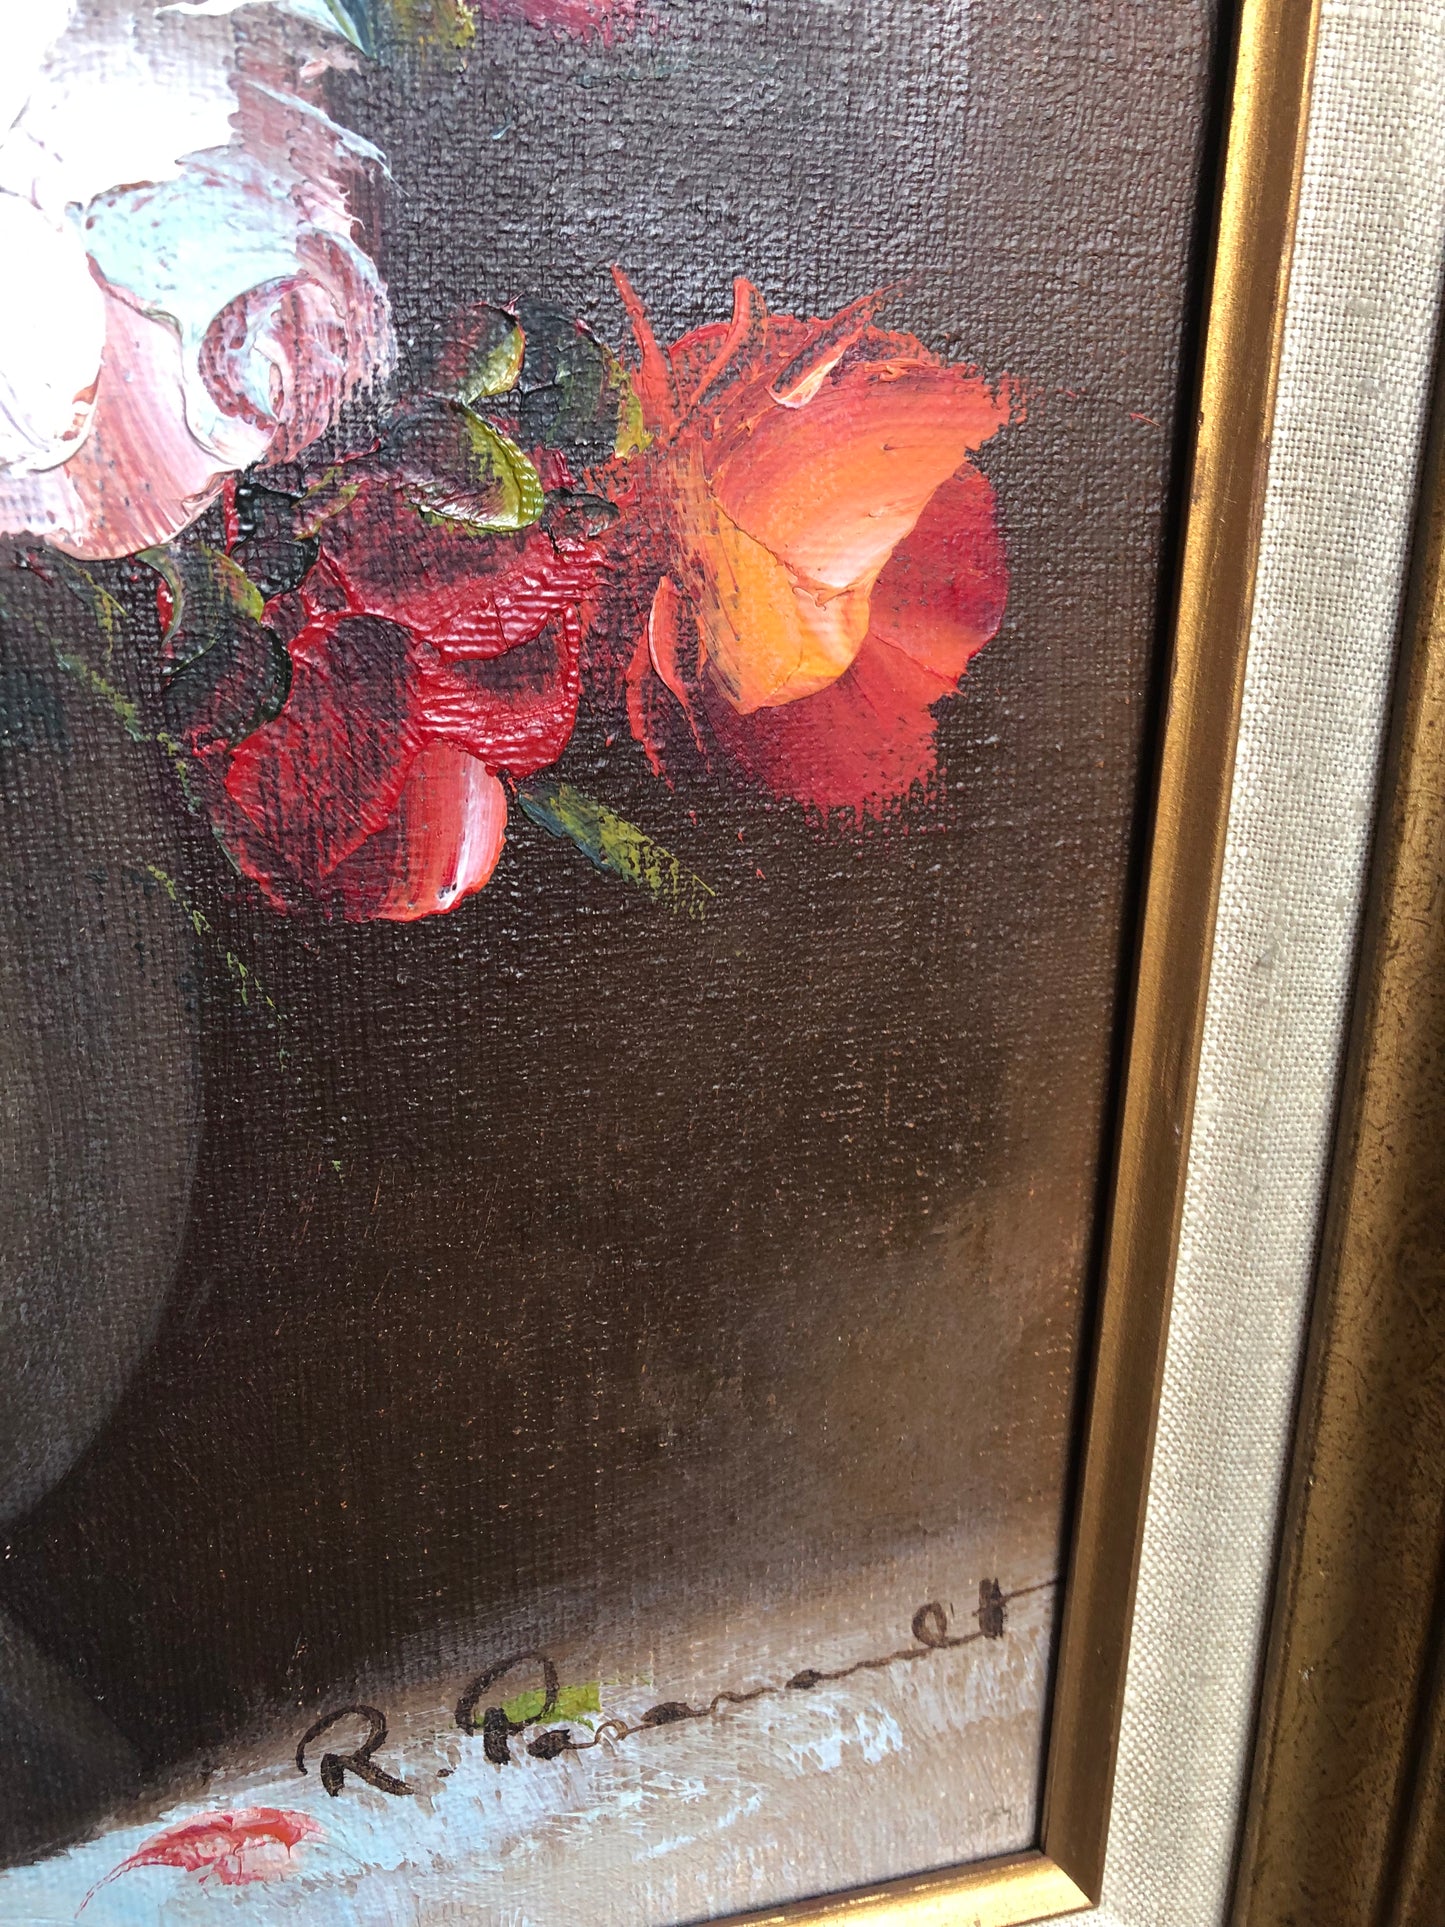 Beautiful Floral Original Framed Painting Signed Roy Pasanault- Excellent condition!